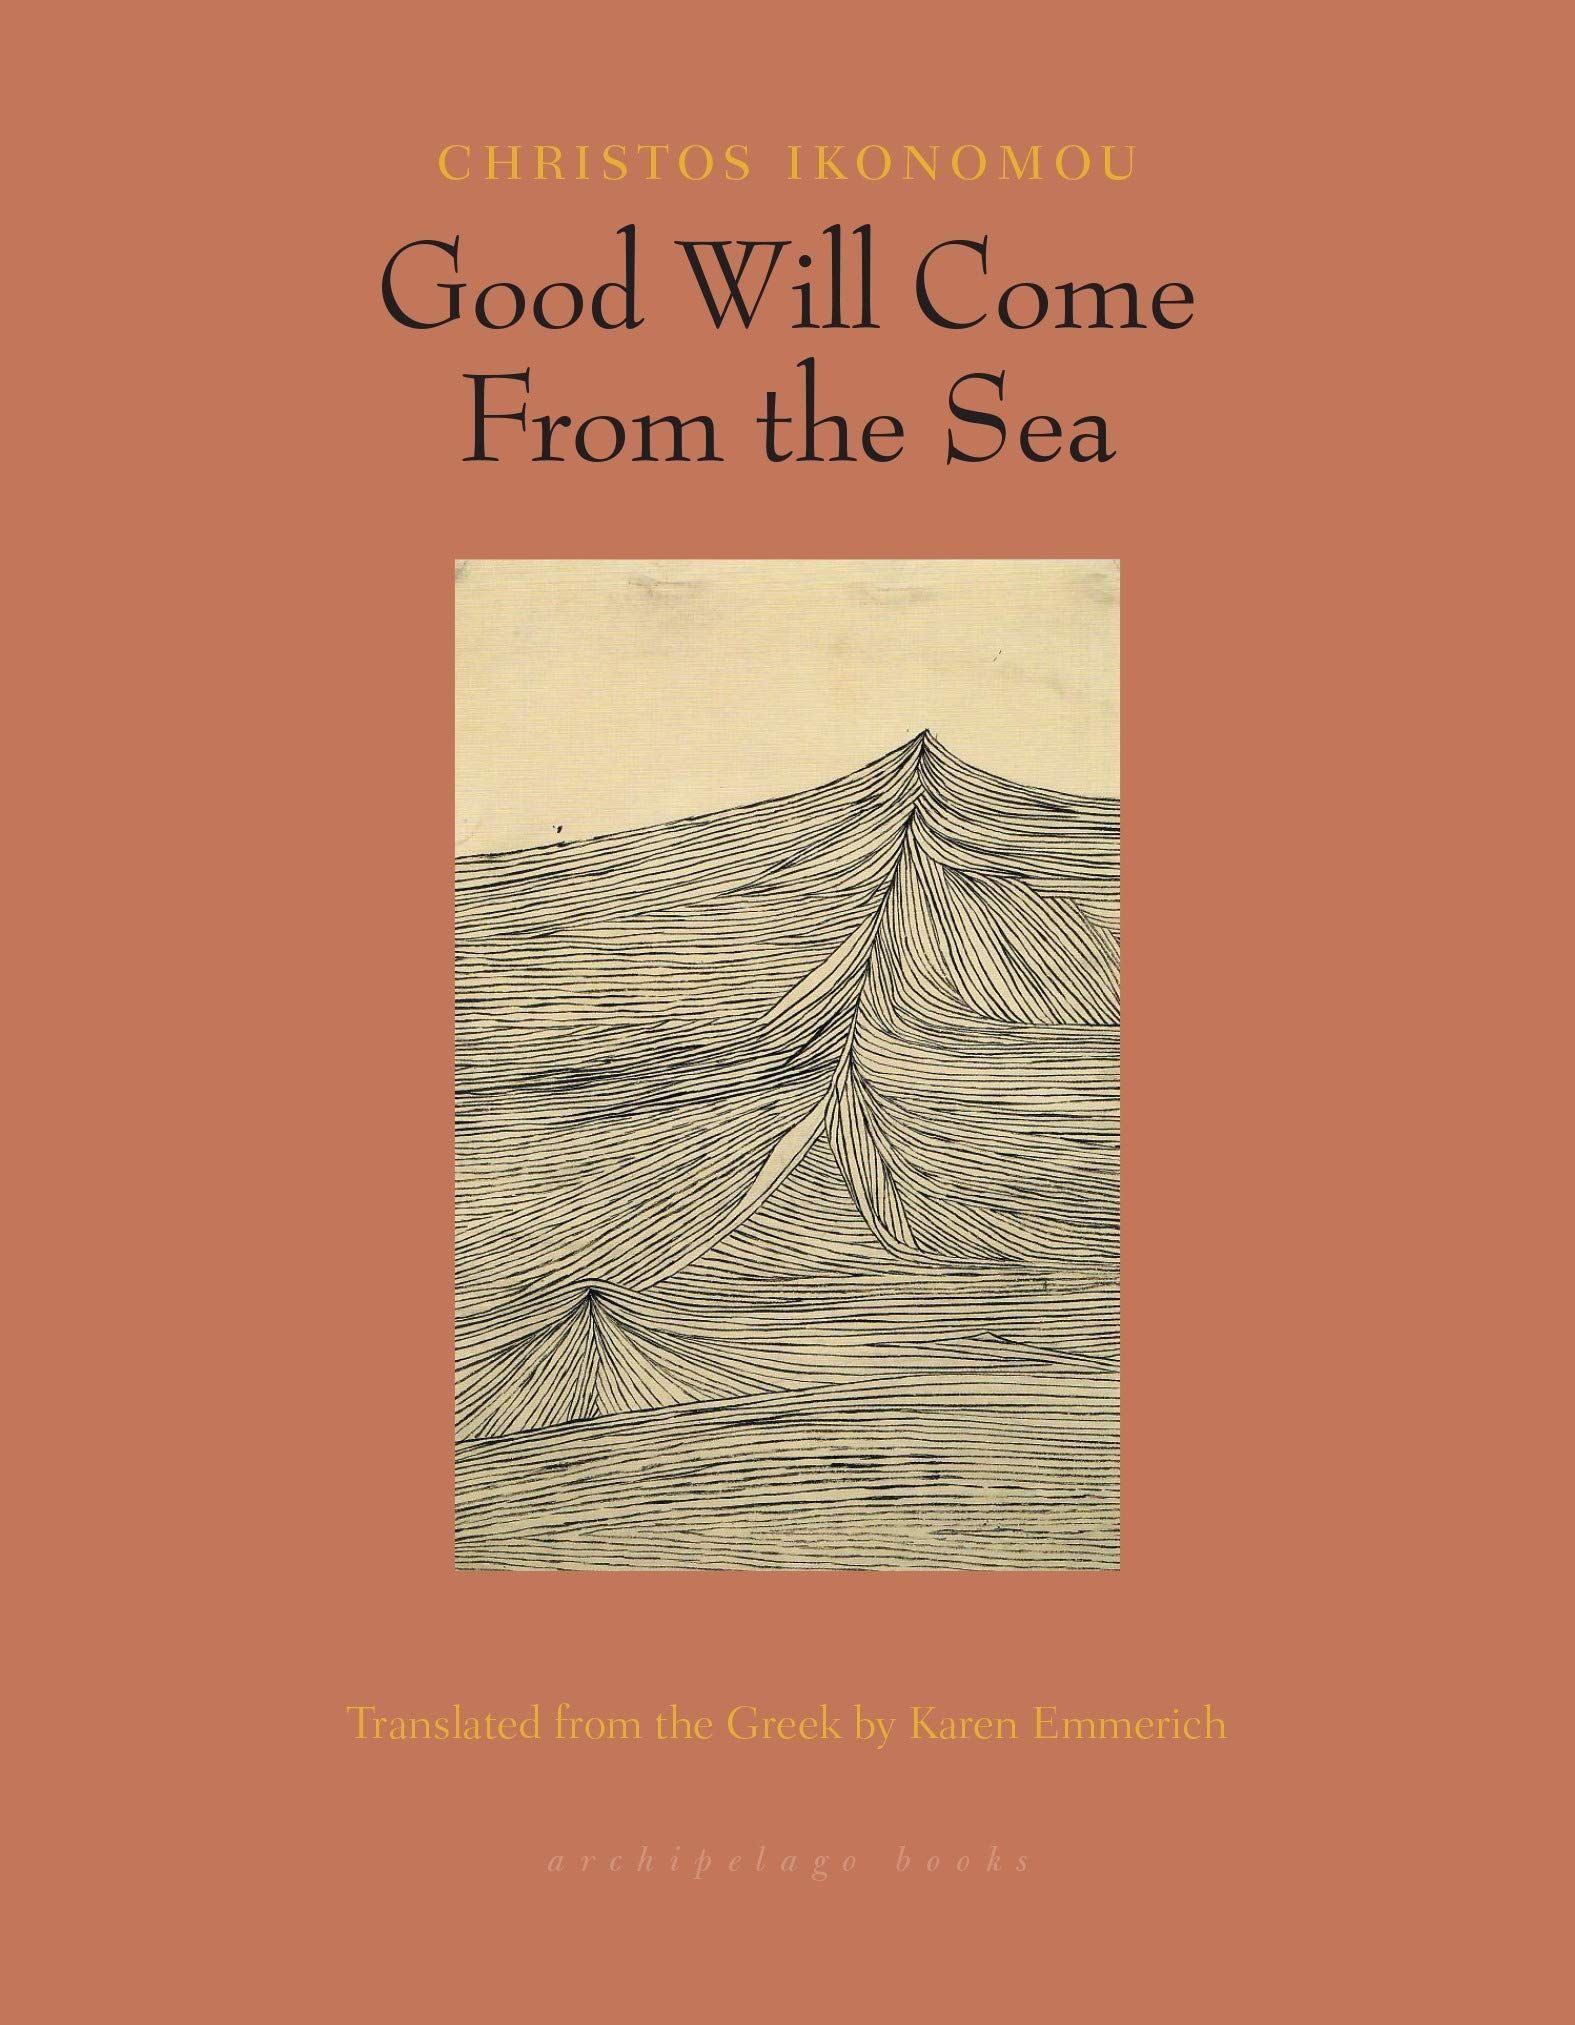 The Beginning Is Never Behind Us: On Christos Ikonomou’s “Good Will Come From the Sea”